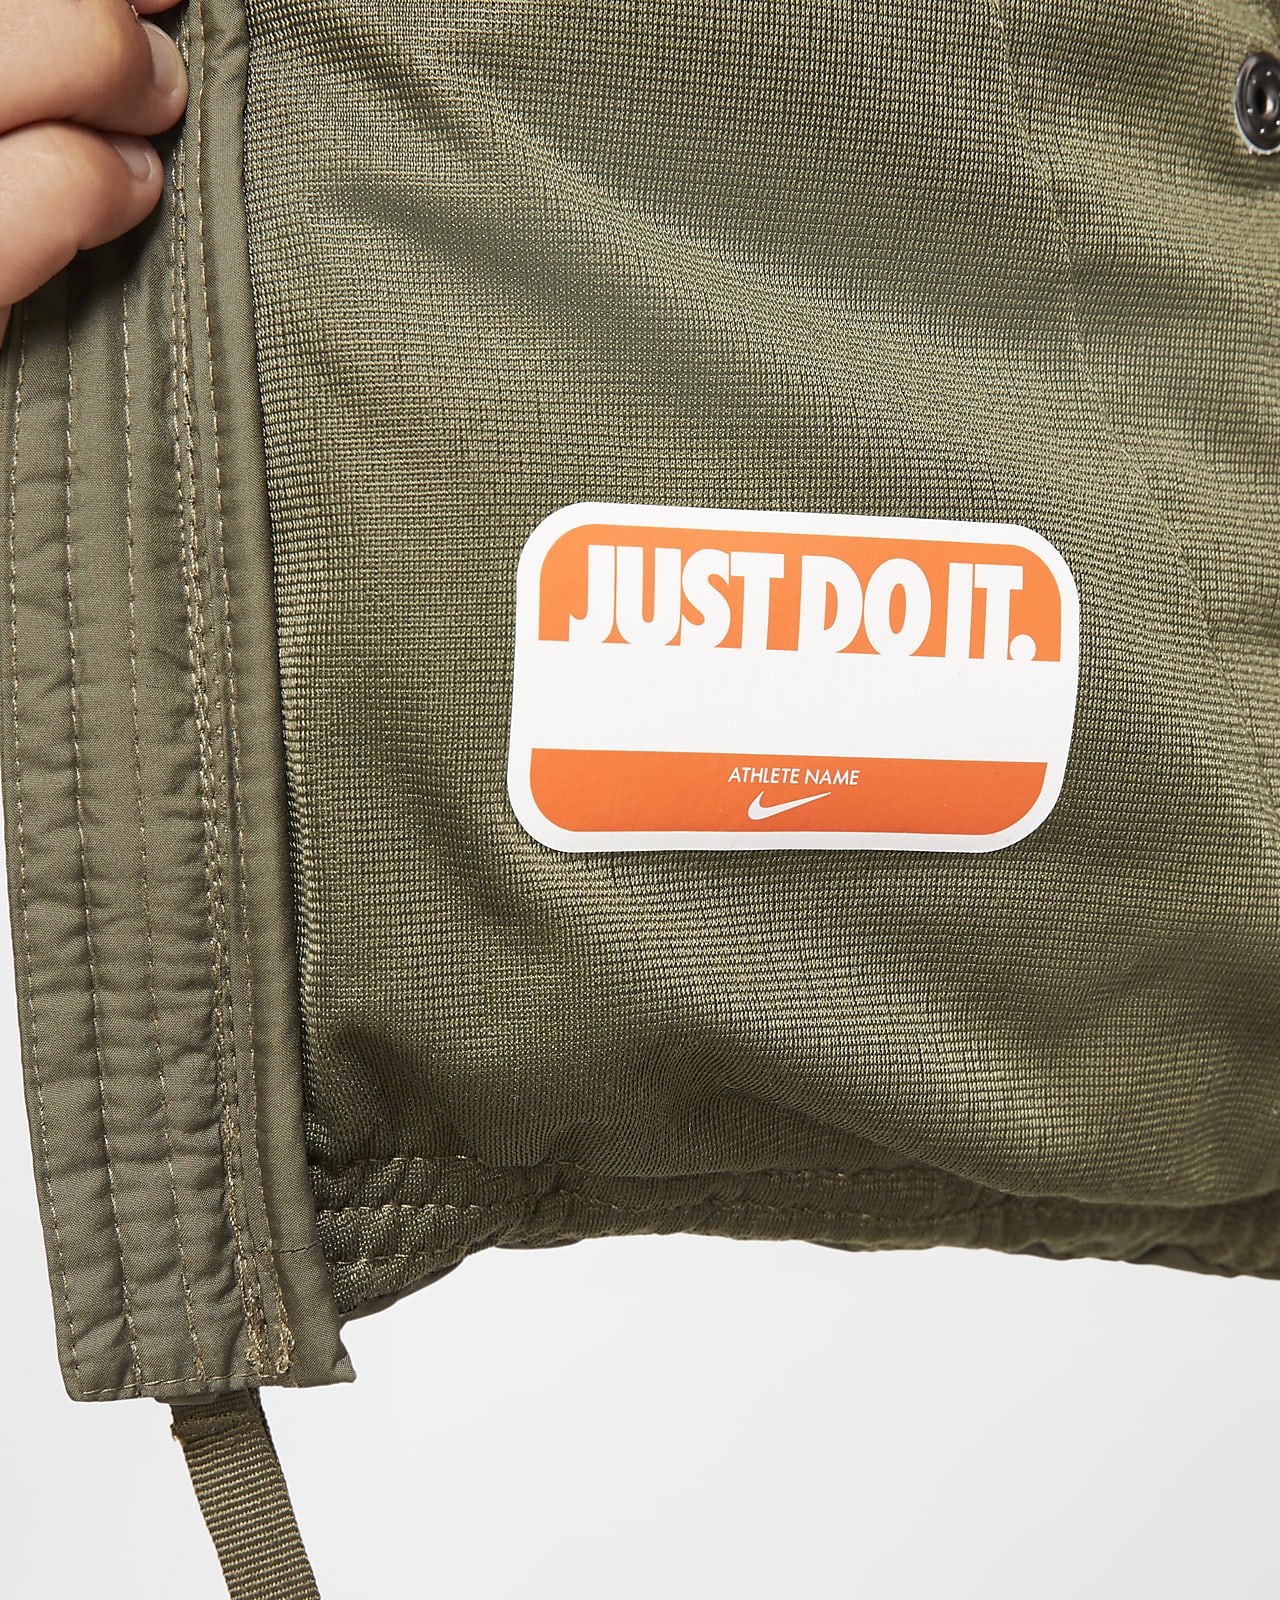 nike jacket that turns into a bag